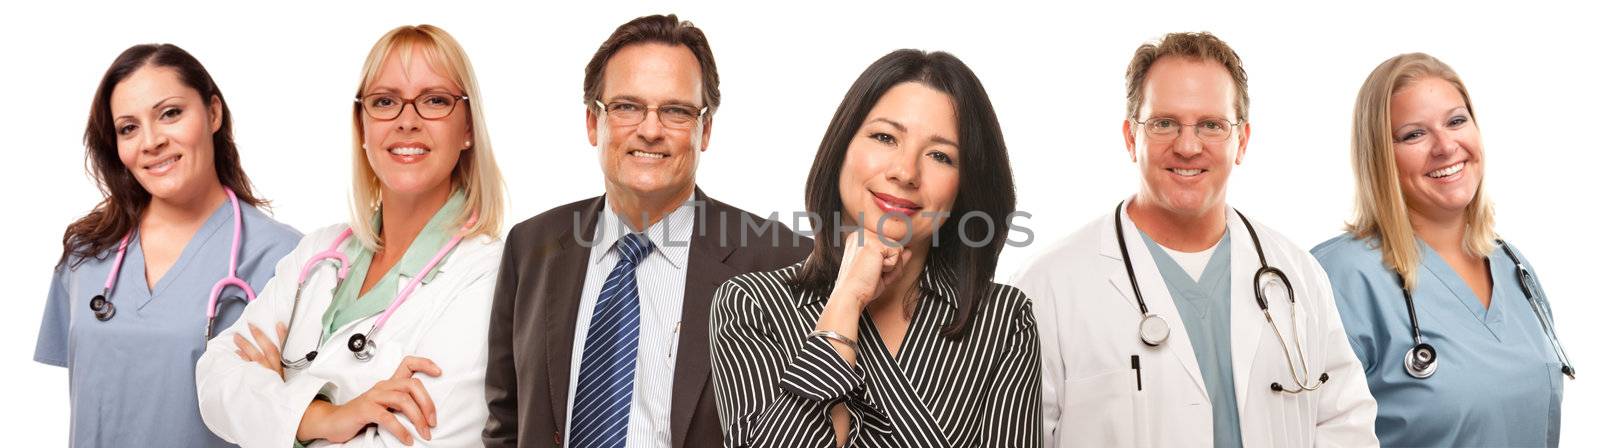 Hispanic Woman and Man with Doctors or Nurses Behind Isolated on a White Background.